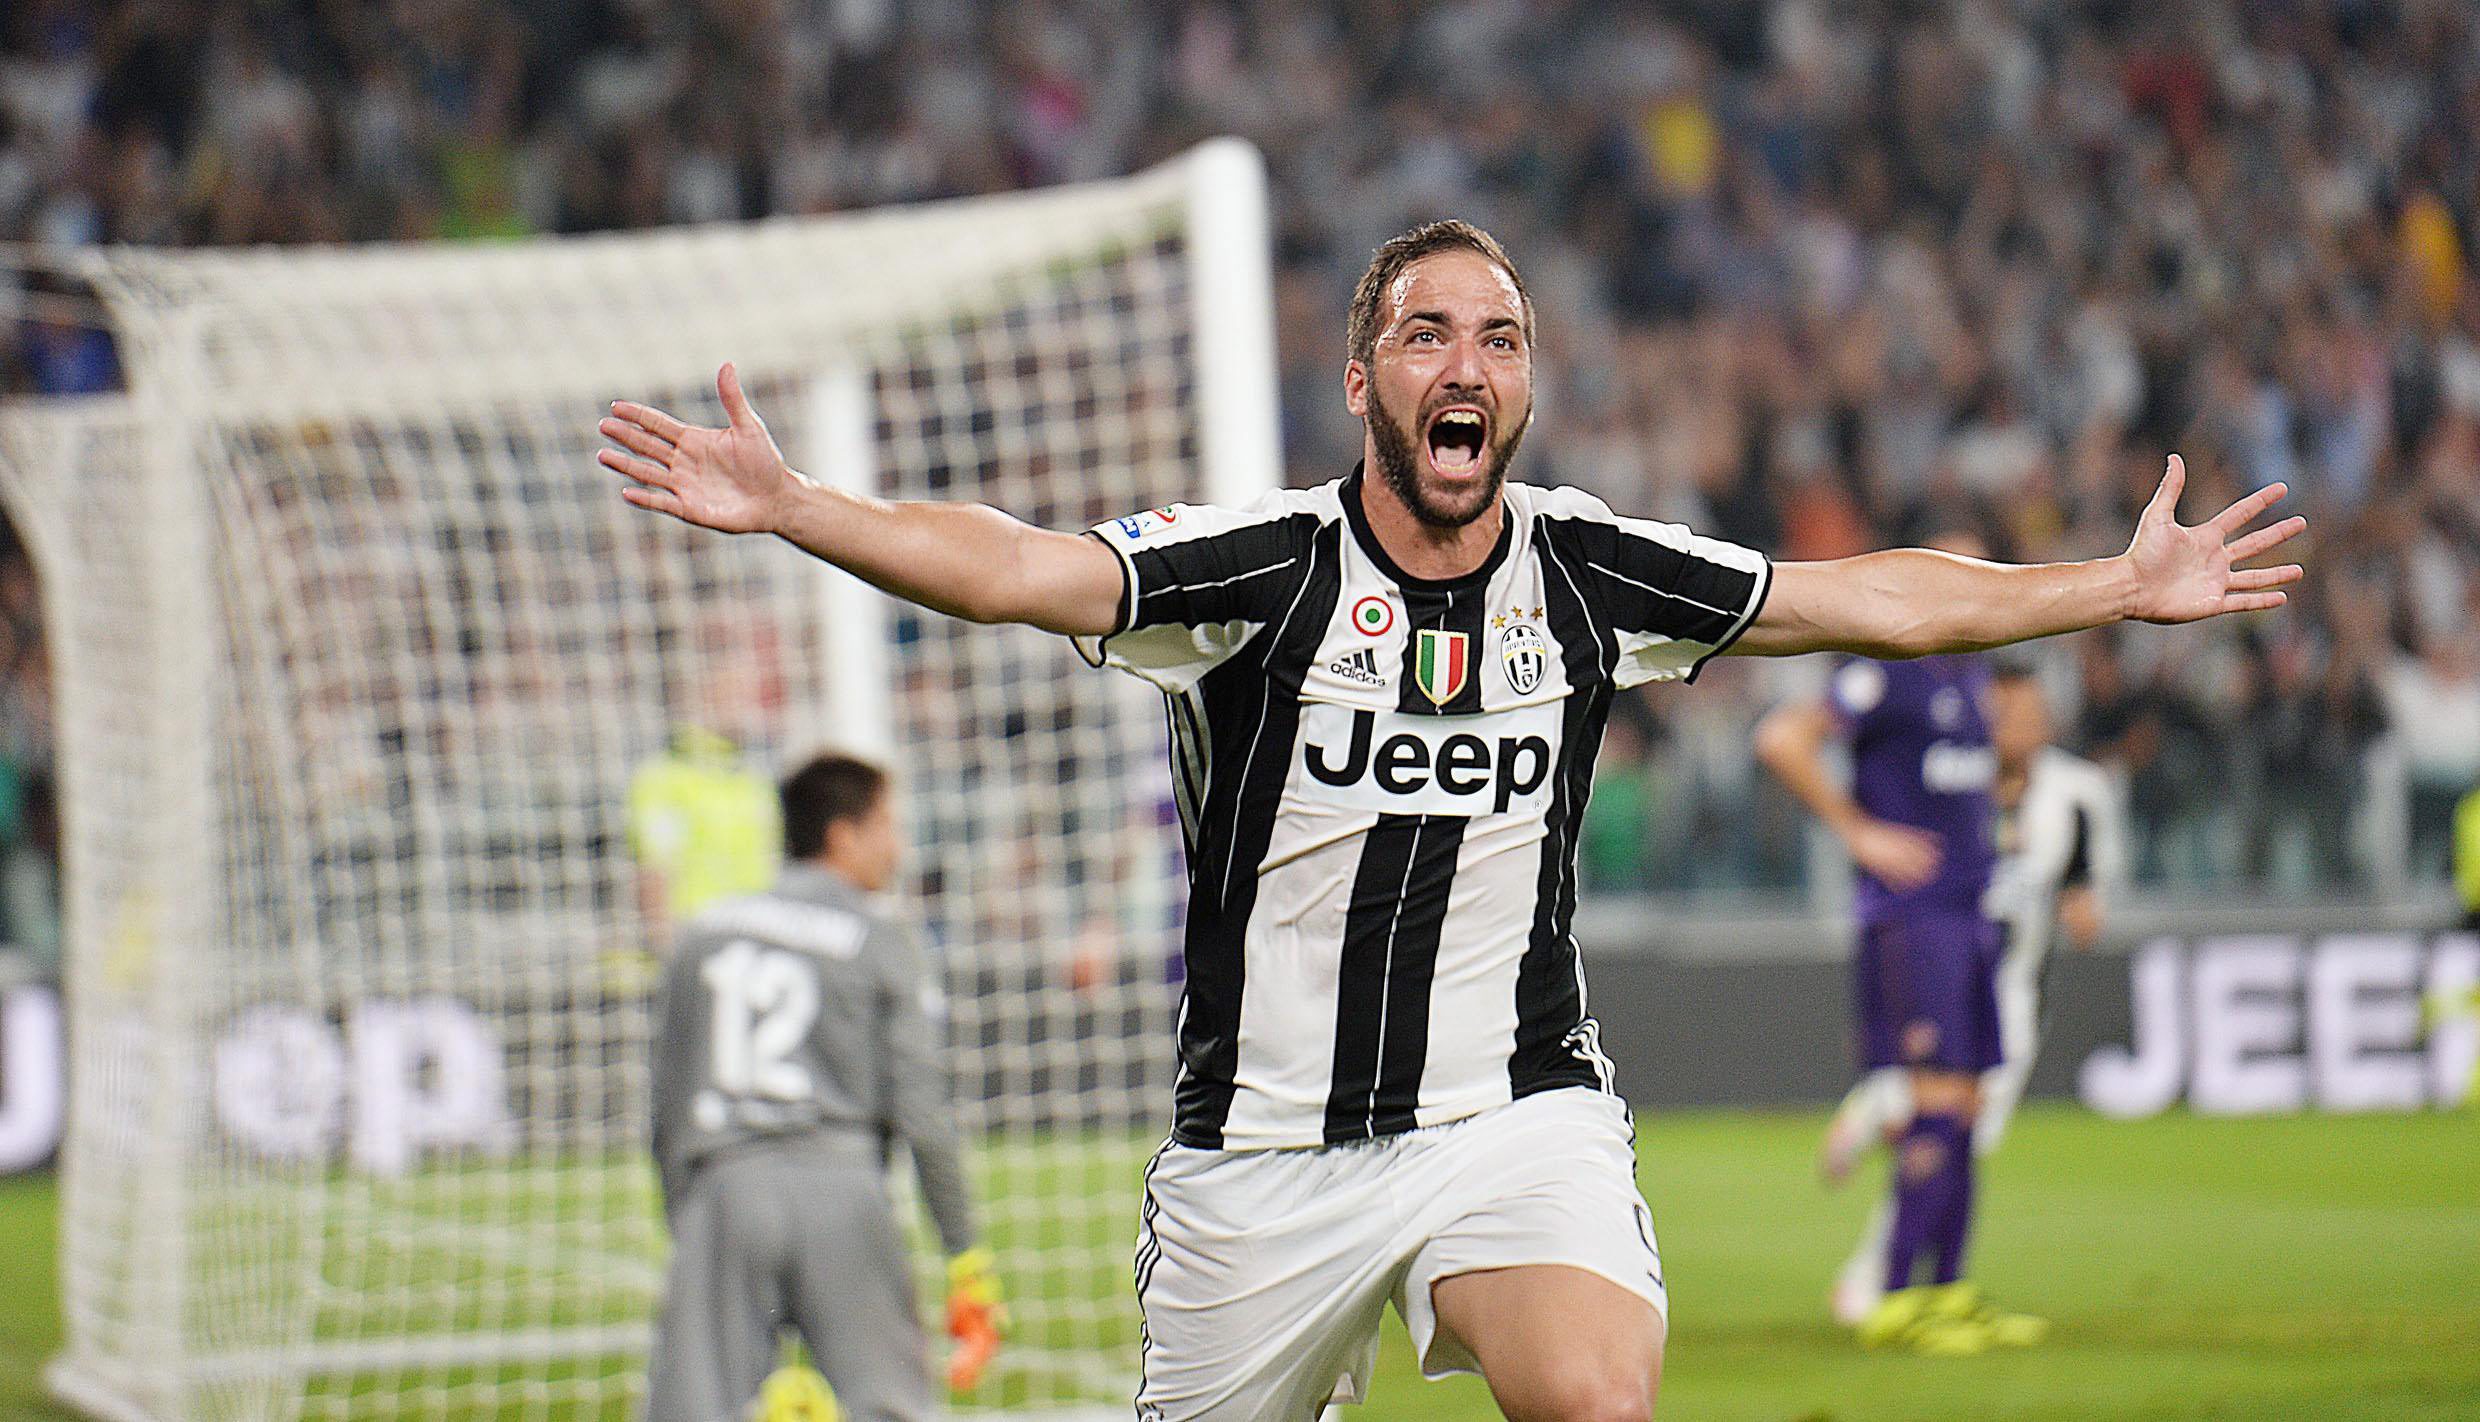 . Turin (Italy), 20/08/2016.- Juventus’ Gonzalo Higuain jubilates after scoring the goal during the Italian Serie A soccer match Juventus FC vs ACF Fiorentina at Juventus Stadium in Turin, Italy, 20 August 2016. (Italia) EFE/EPA/ALESSANDRO DI MARCO